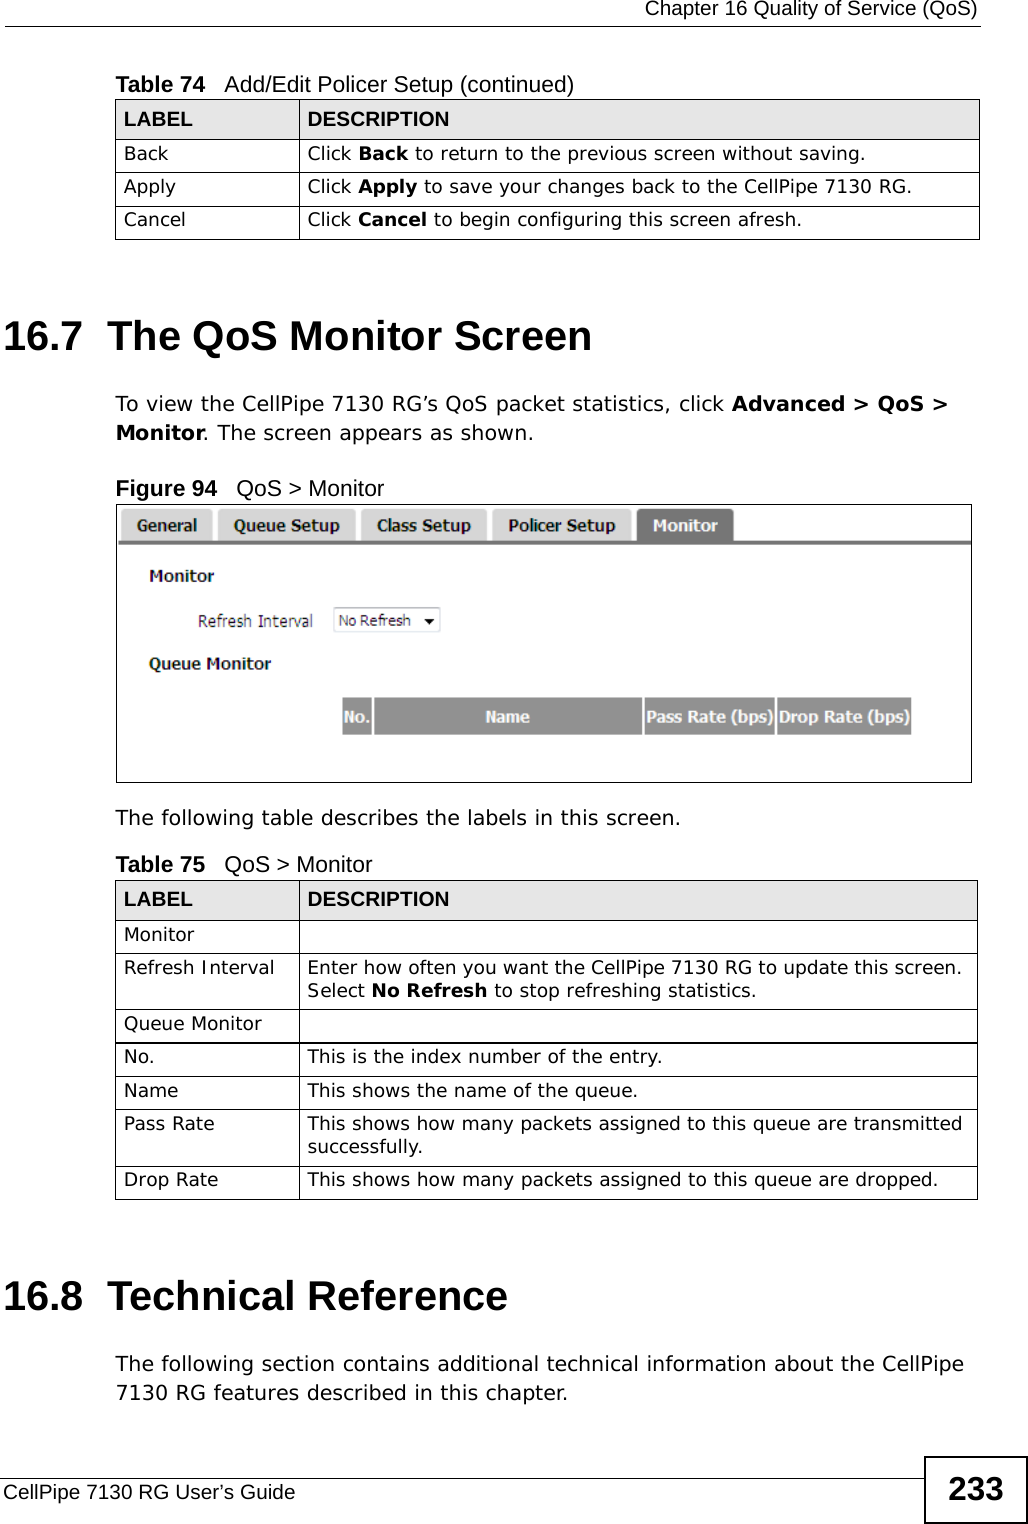  Chapter 16 Quality of Service (QoS)CellPipe 7130 RG User’s Guide 23316.7  The QoS Monitor Screen To view the CellPipe 7130 RG’s QoS packet statistics, click Advanced &gt; QoS &gt; Monitor. The screen appears as shown. Figure 94   QoS &gt; Monitor The following table describes the labels in this screen.  16.8  Technical ReferenceThe following section contains additional technical information about the CellPipe 7130 RG features described in this chapter.Back Click Back to return to the previous screen without saving.Apply Click Apply to save your changes back to the CellPipe 7130 RG.Cancel Click Cancel to begin configuring this screen afresh.Table 74   Add/Edit Policer Setup (continued)LABEL DESCRIPTIONTable 75   QoS &gt; MonitorLABEL DESCRIPTIONMonitorRefresh Interval Enter how often you want the CellPipe 7130 RG to update this screen. Select No Refresh to stop refreshing statistics.Queue MonitorNo. This is the index number of the entry.Name This shows the name of the queue. Pass Rate This shows how many packets assigned to this queue are transmitted successfully.Drop Rate This shows how many packets assigned to this queue are dropped.